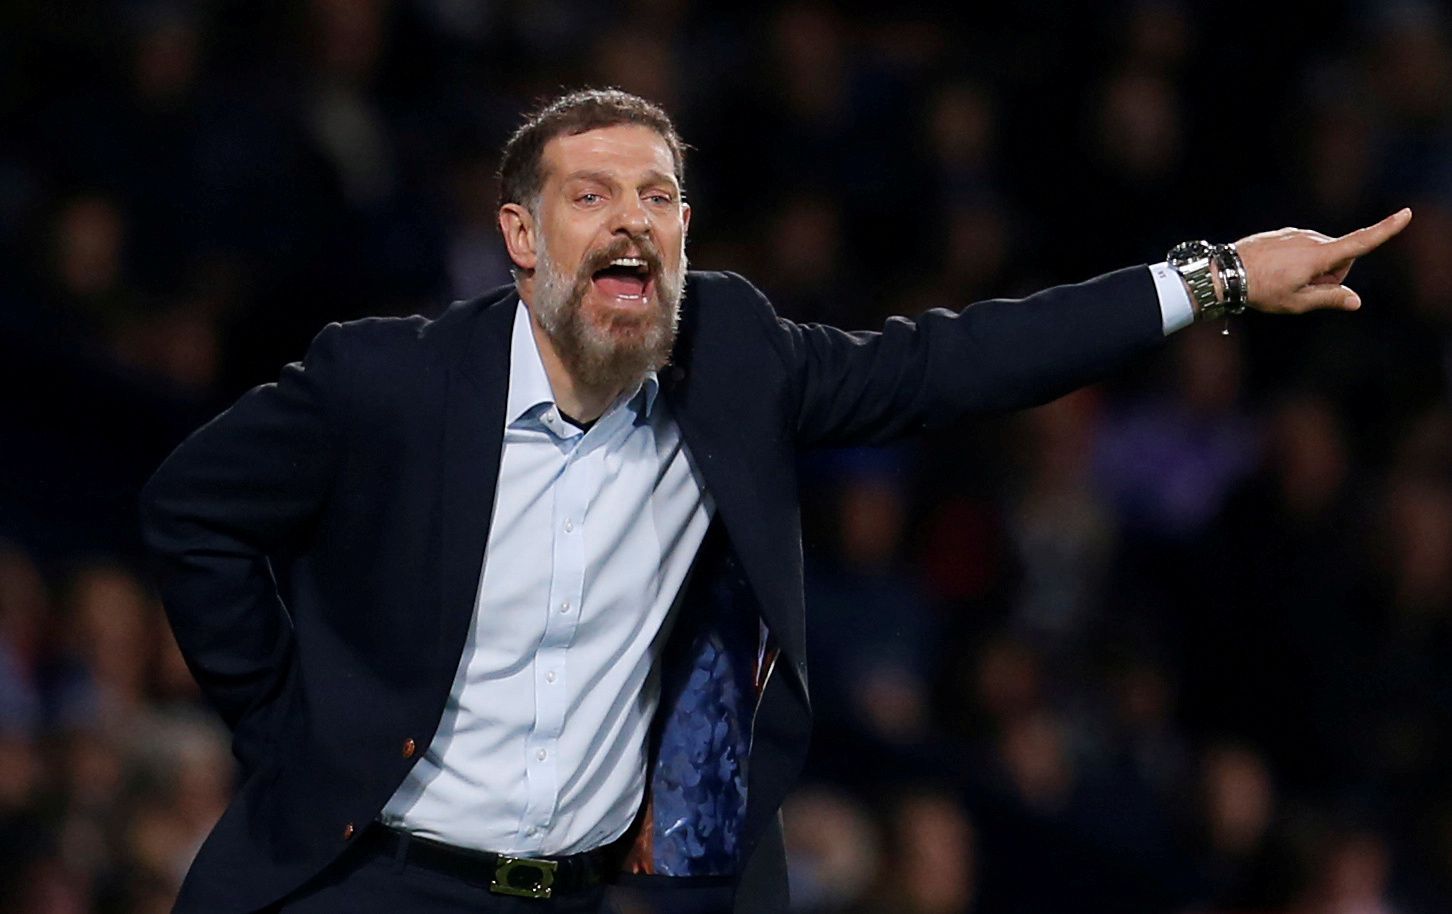 FILE PHOTO: Soccer Football - Championship - West Bromwich Albion v Barnsley - The Hawthorns, West Bromwich, Britain - October 22, 2019  West Bromwich Albion manager Slaven Bilic  Action Images via Reuters/Ed Sykes  EDITORIAL USE ONLY. No use with unauthorized audio, video, data, fixture lists, club/league logos or 